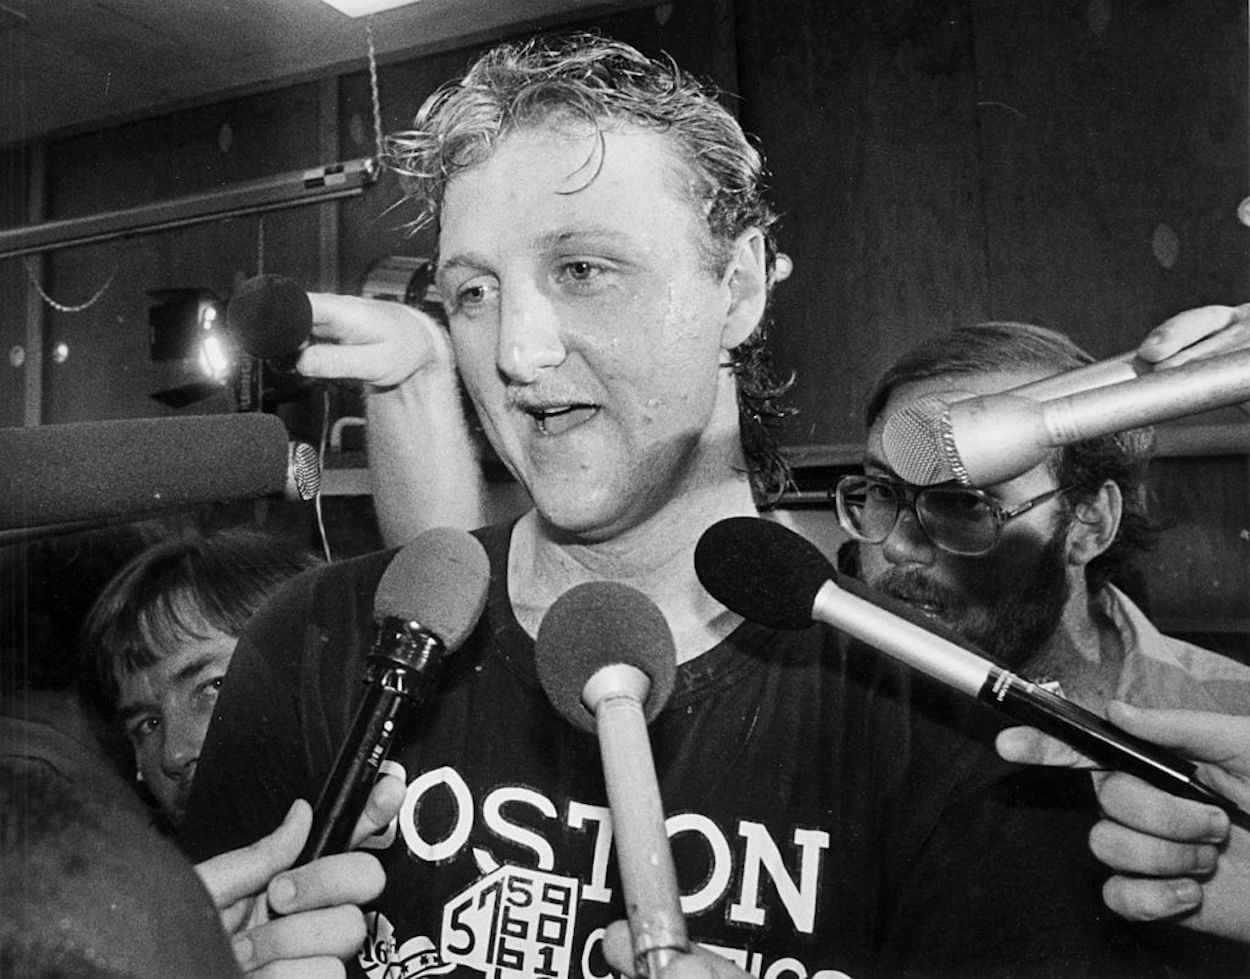 Larry Bird speaks to reporters after a game in 1986.